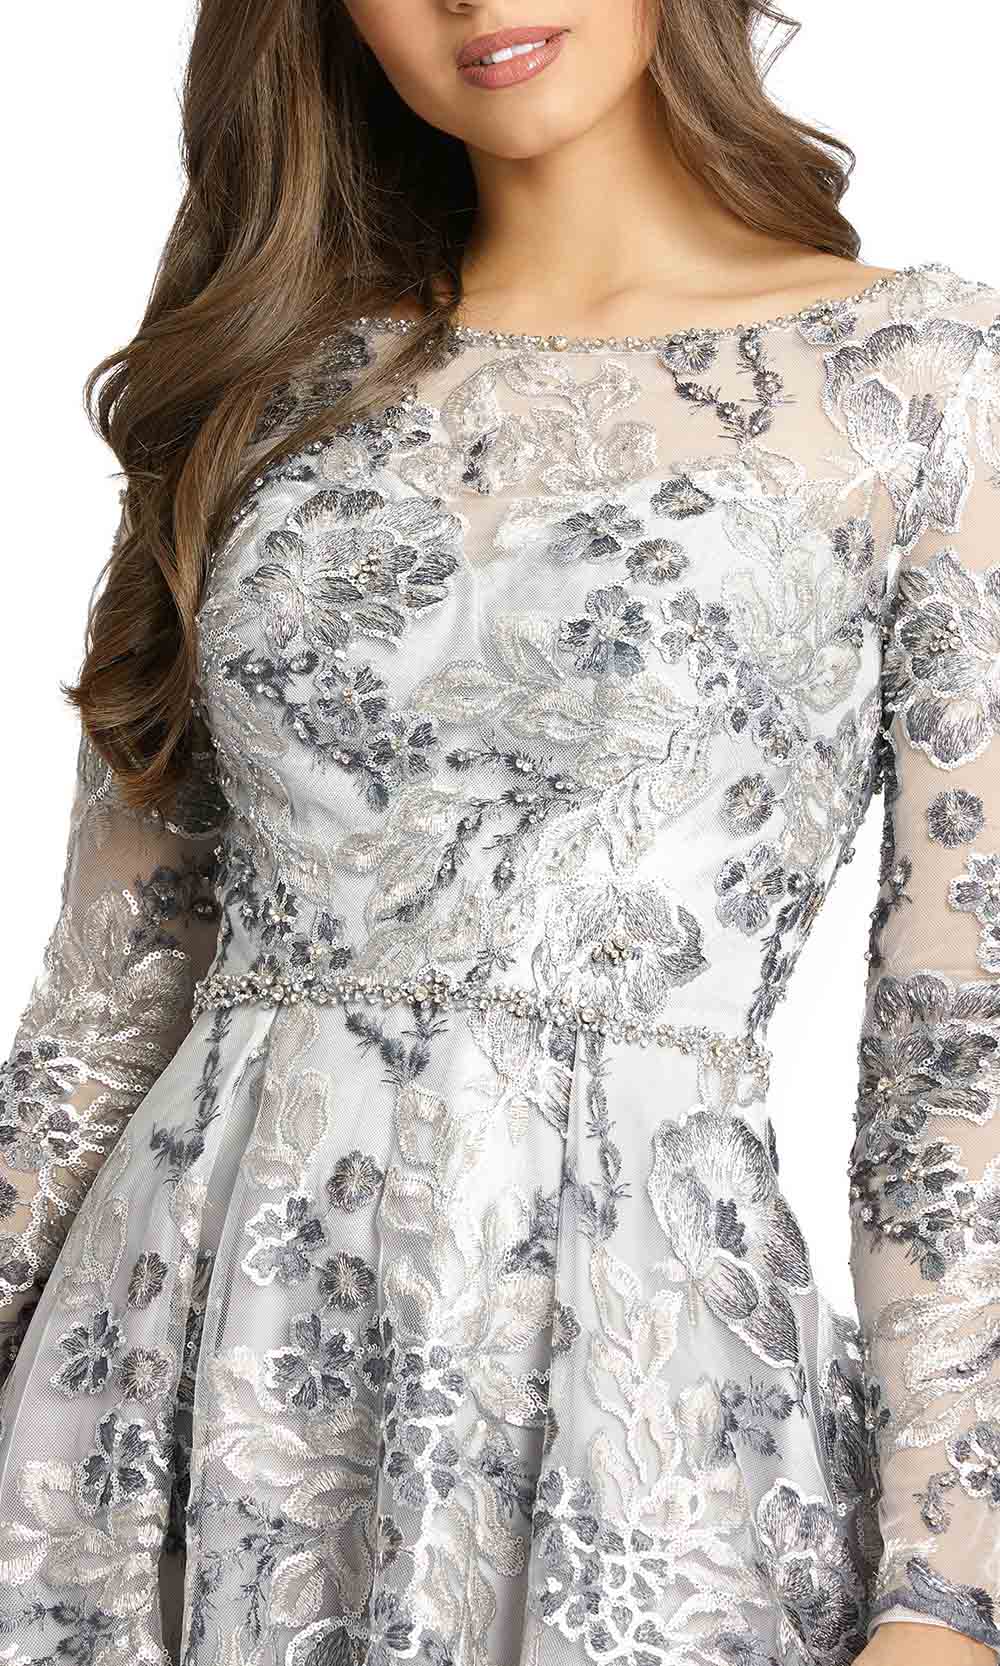 Mac Duggal - 11185D Long Sleeve Sequin Ornate Lace Gown In Silver and Gray